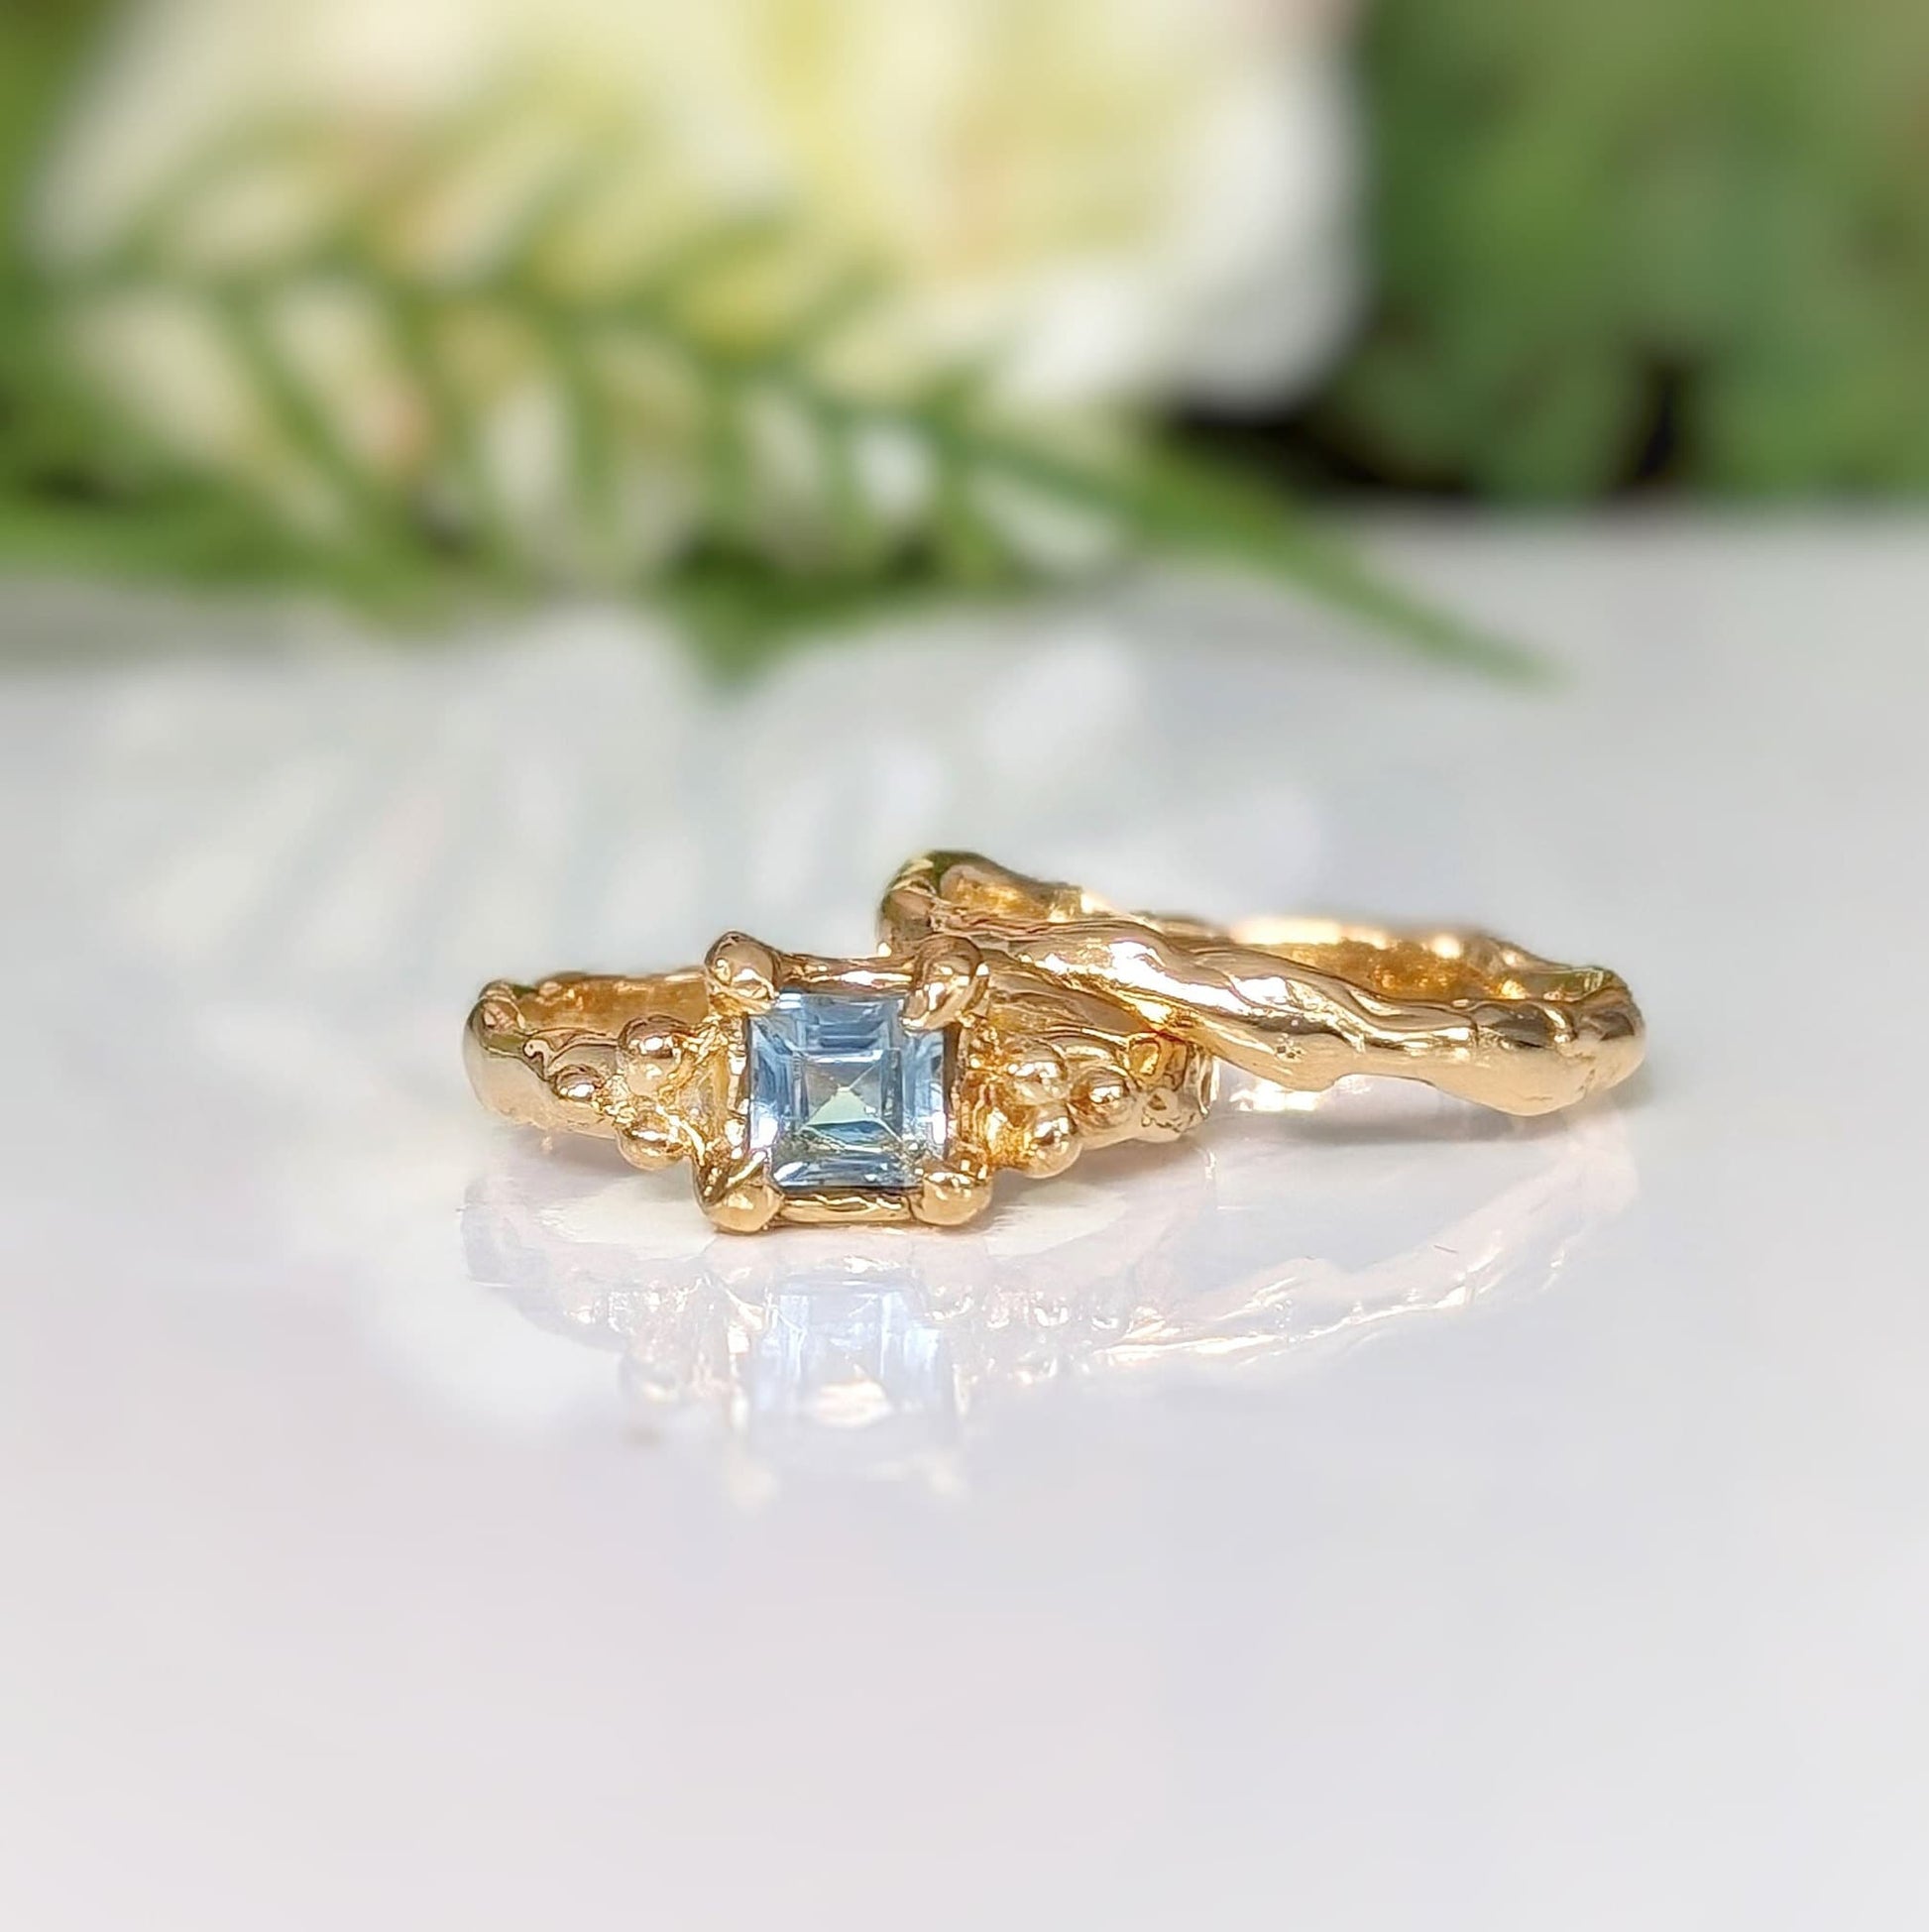 Set of wedding bands - Square Blue Topaz engagement ring and simple textured Molten Solid 14k Gold wedding band